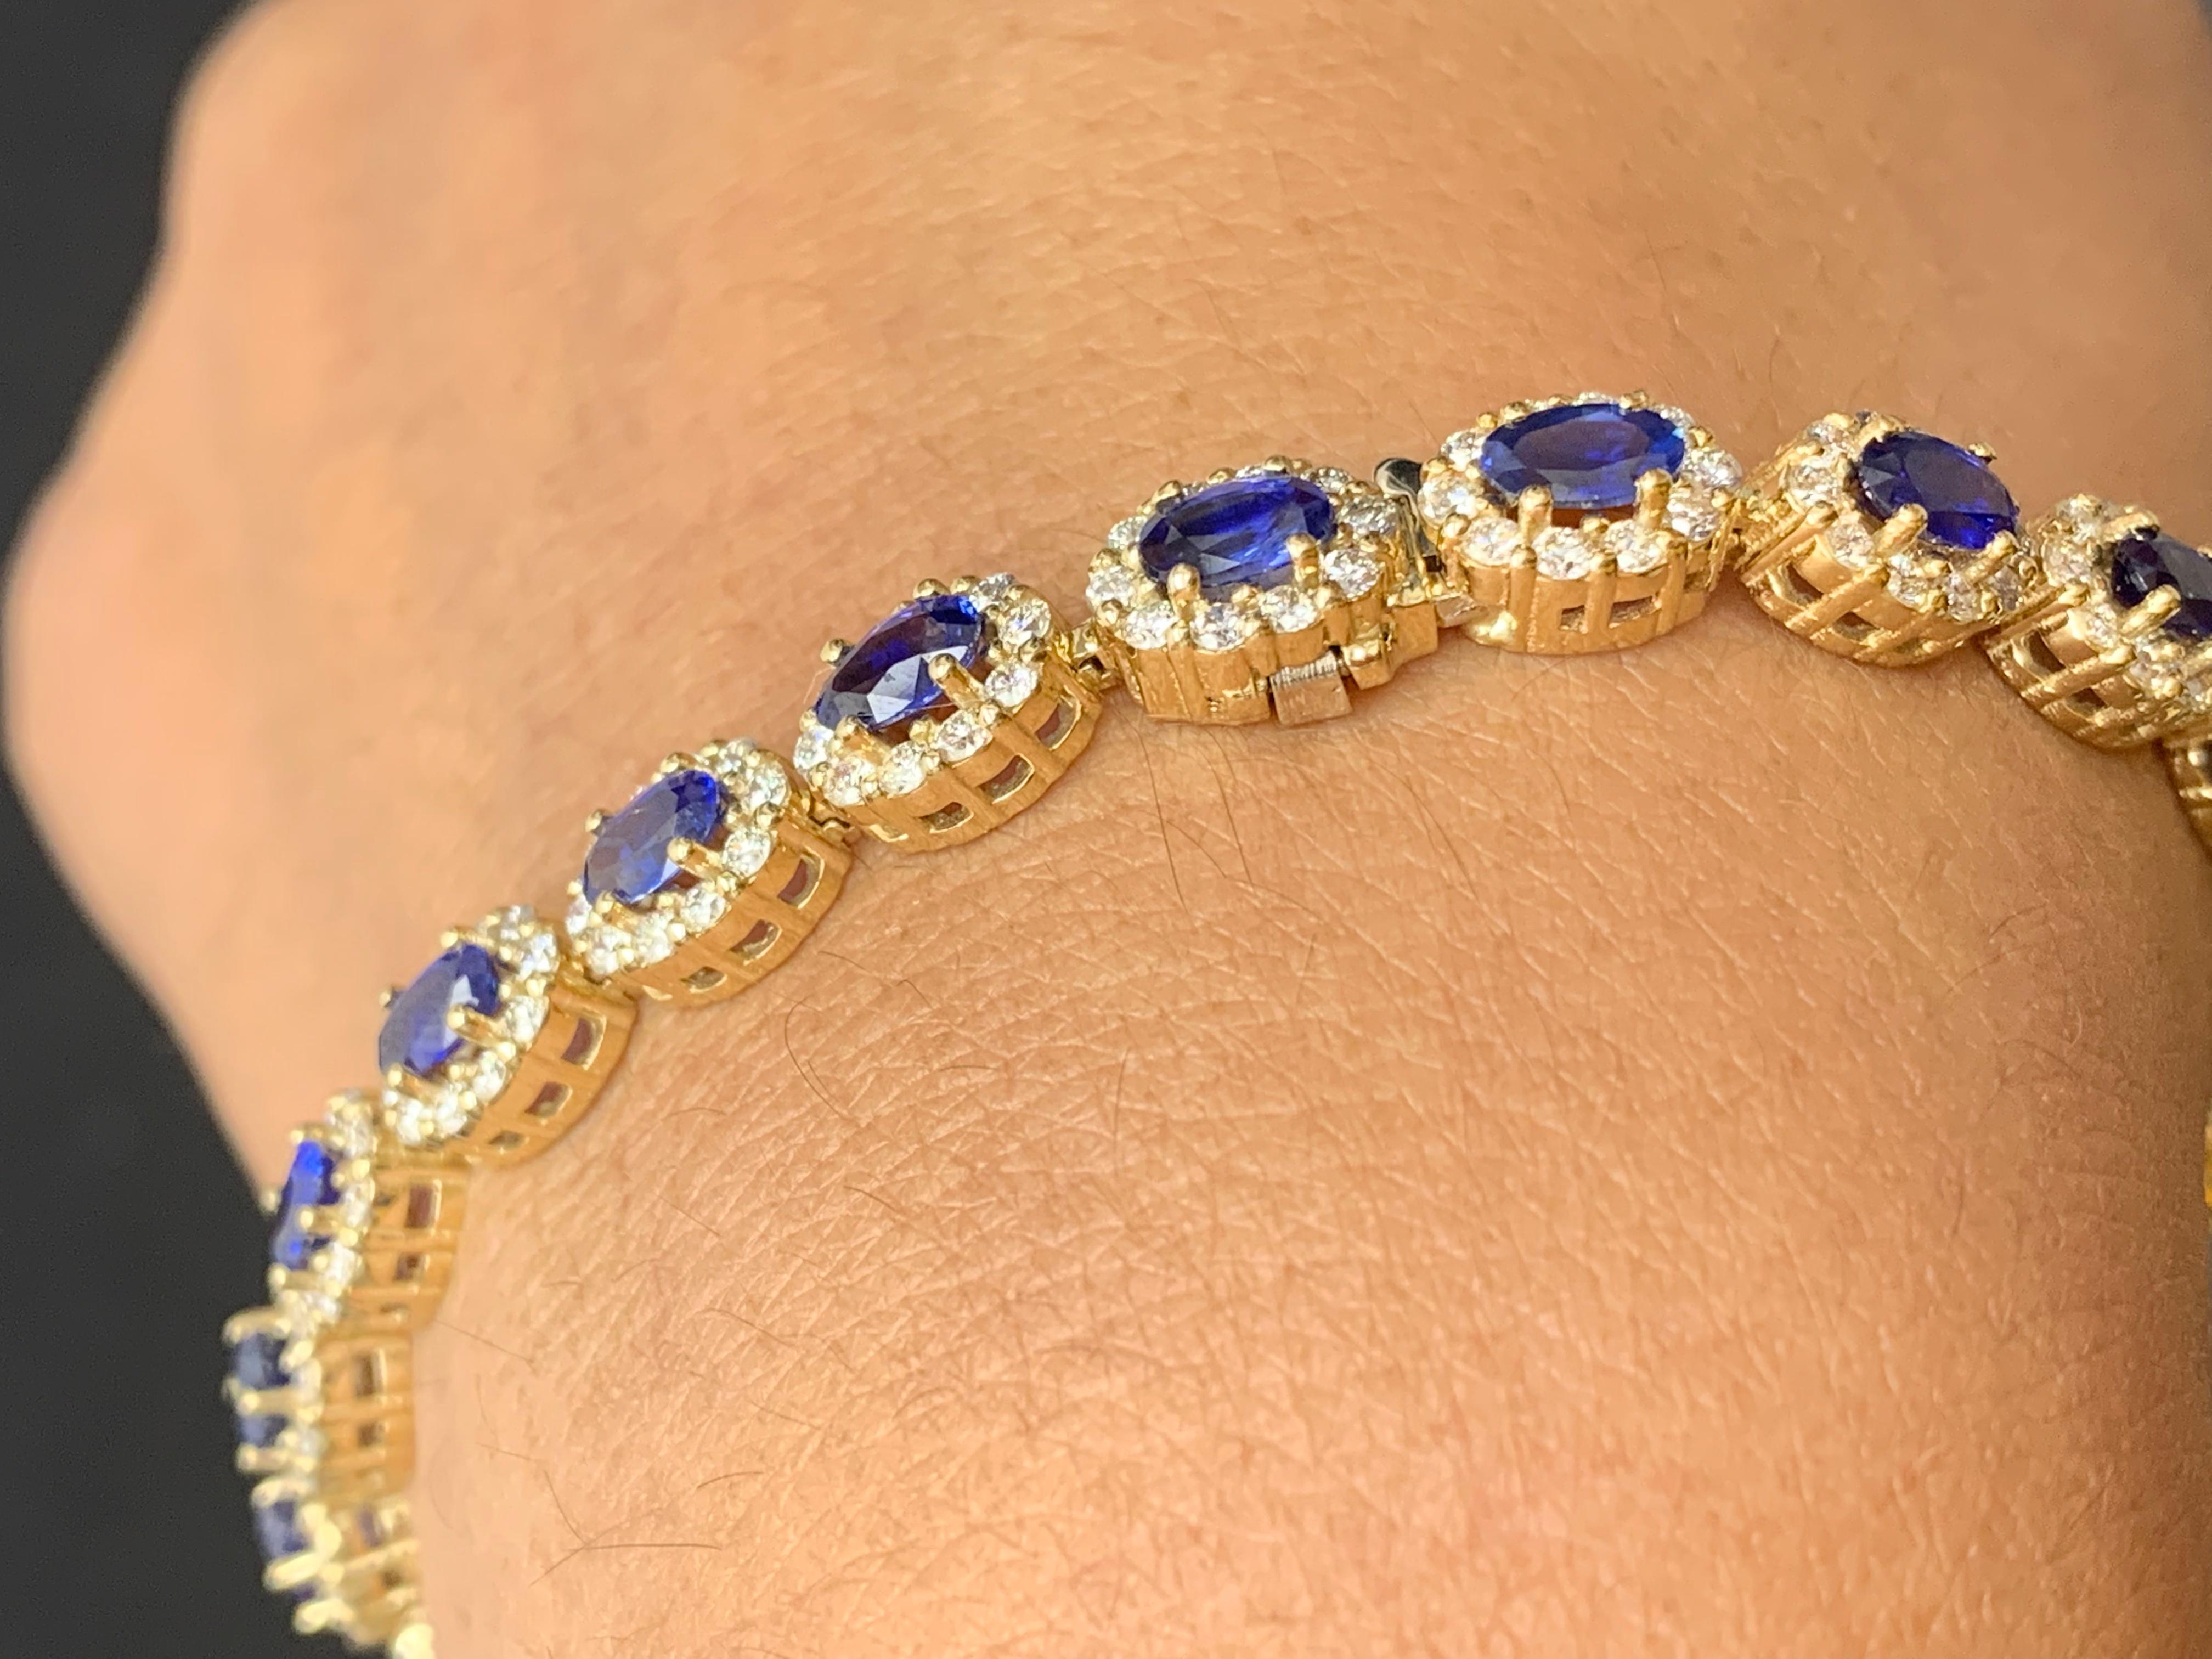 6.24 Carat Oval Cut Blue Sapphire and Diamond Halo Bracelet in 14K Yellow Gold For Sale 1